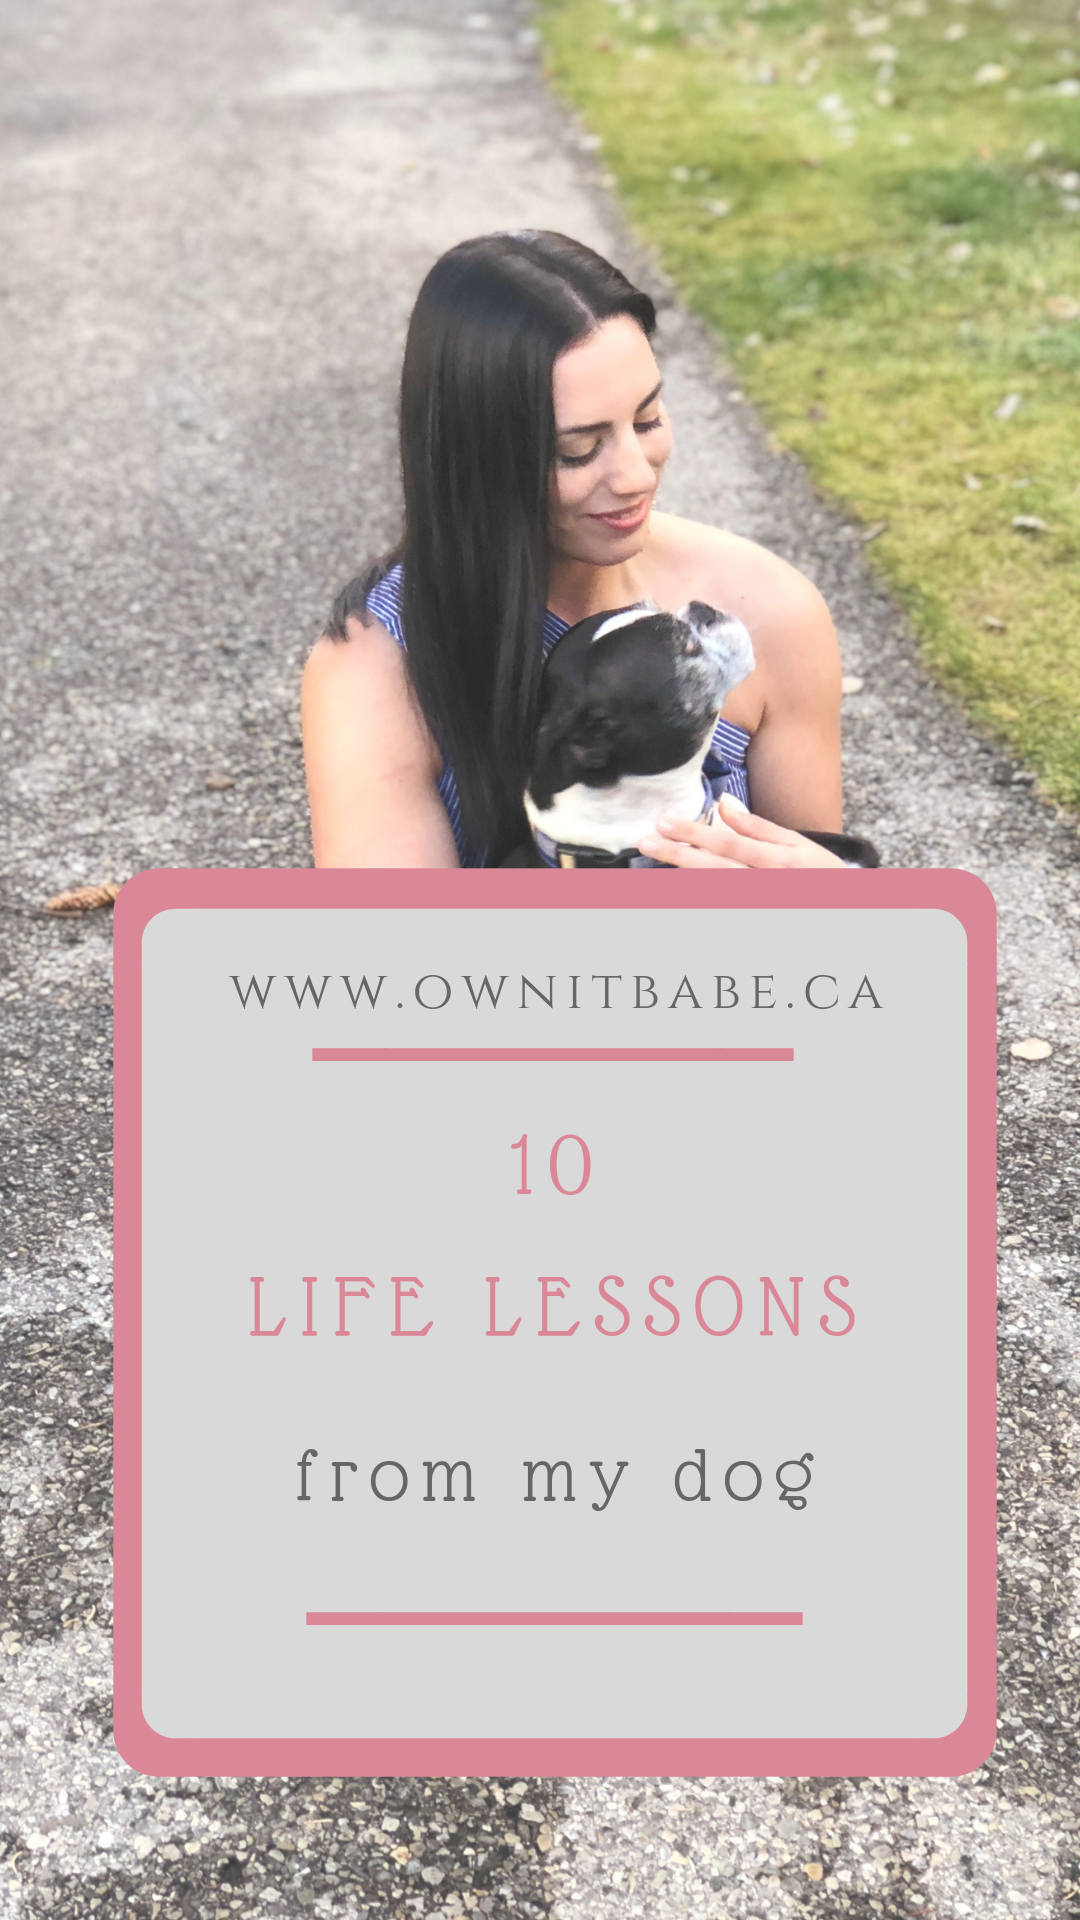 10 Valuable Life Lessons from my dog - I promise this will inspire you and make your smile! - by Rini Frey, ownitbabe.ca #lifelessons #happiness #personalgrowth #selfdevelopment